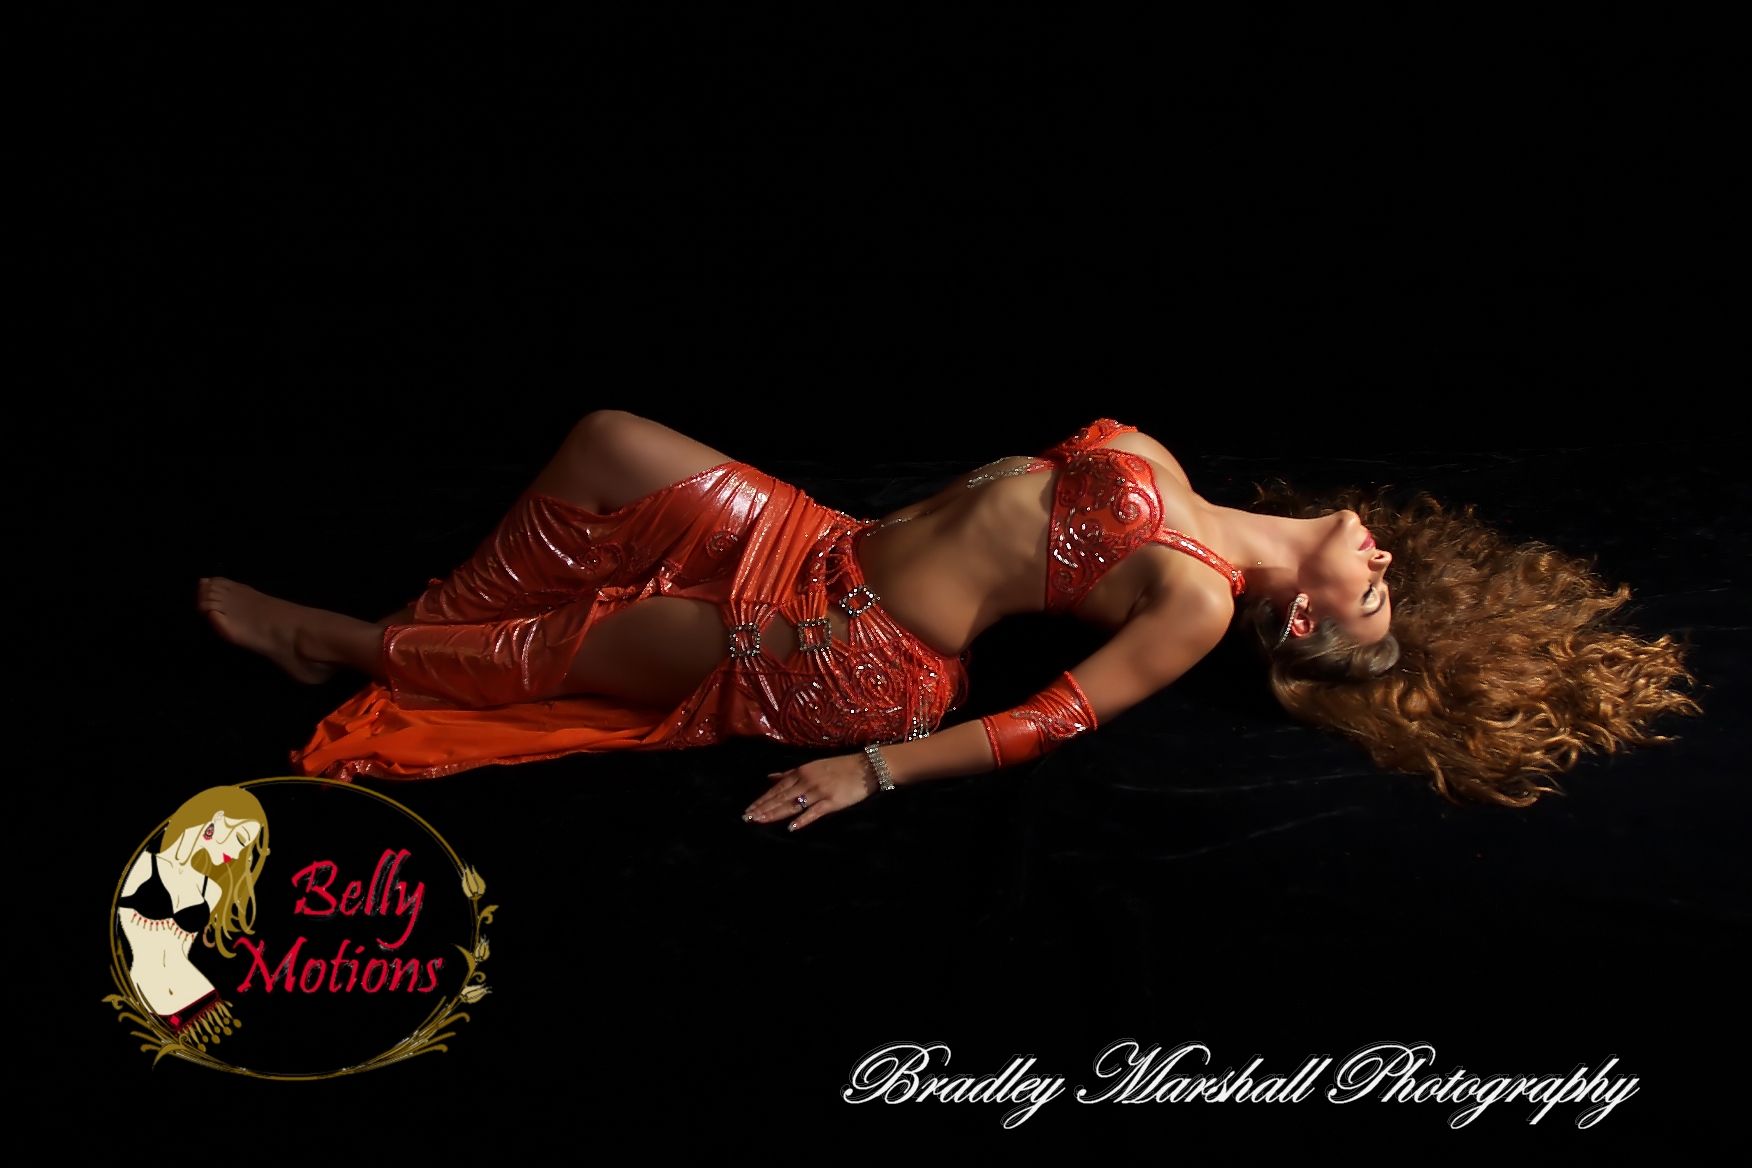 Portia      Belly Motions, Inc.